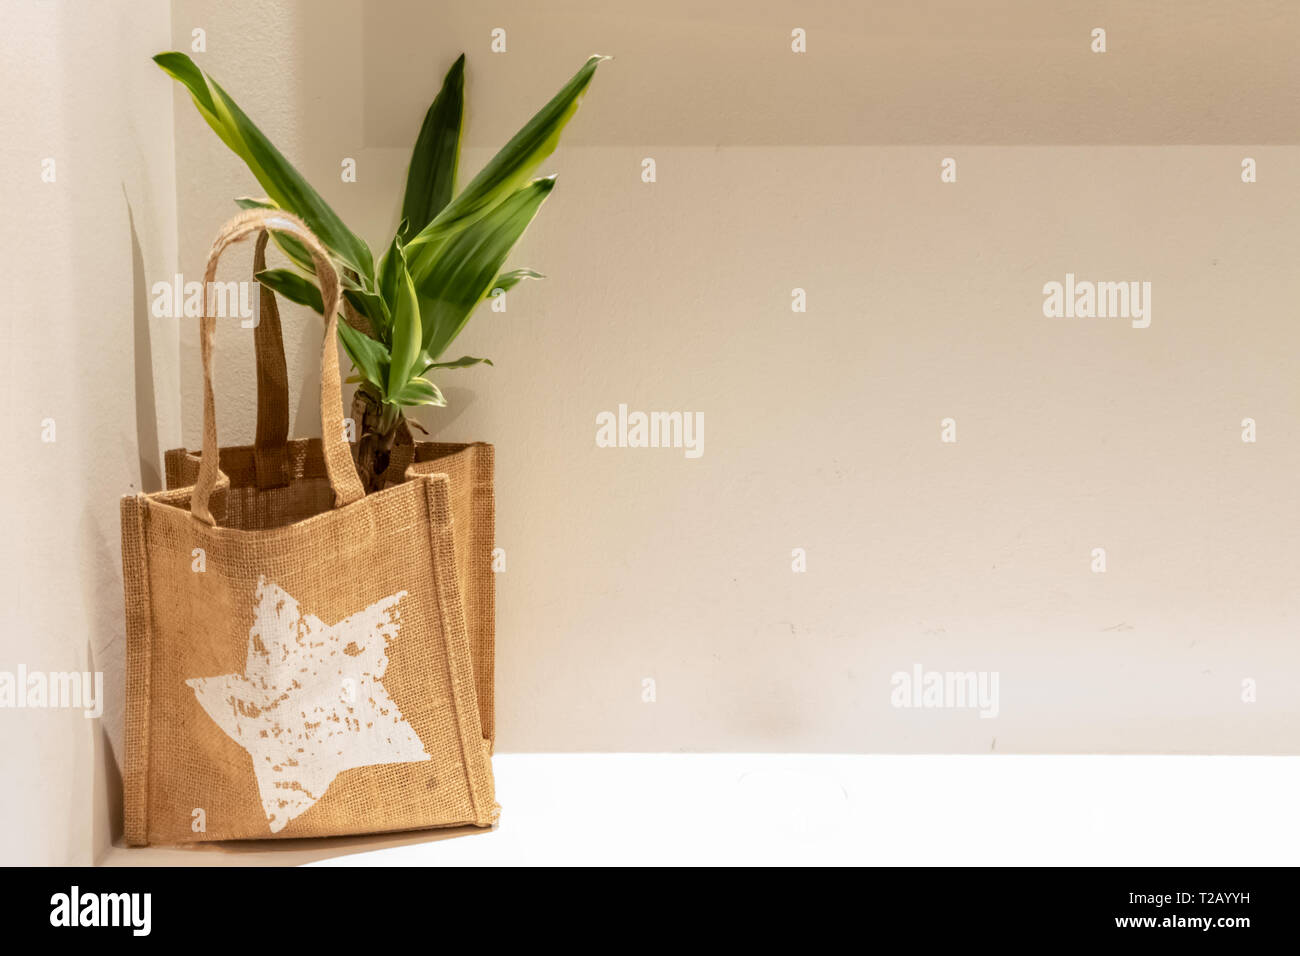 Green Office Plant In A Nature Eco Burlap Brown Bag With A